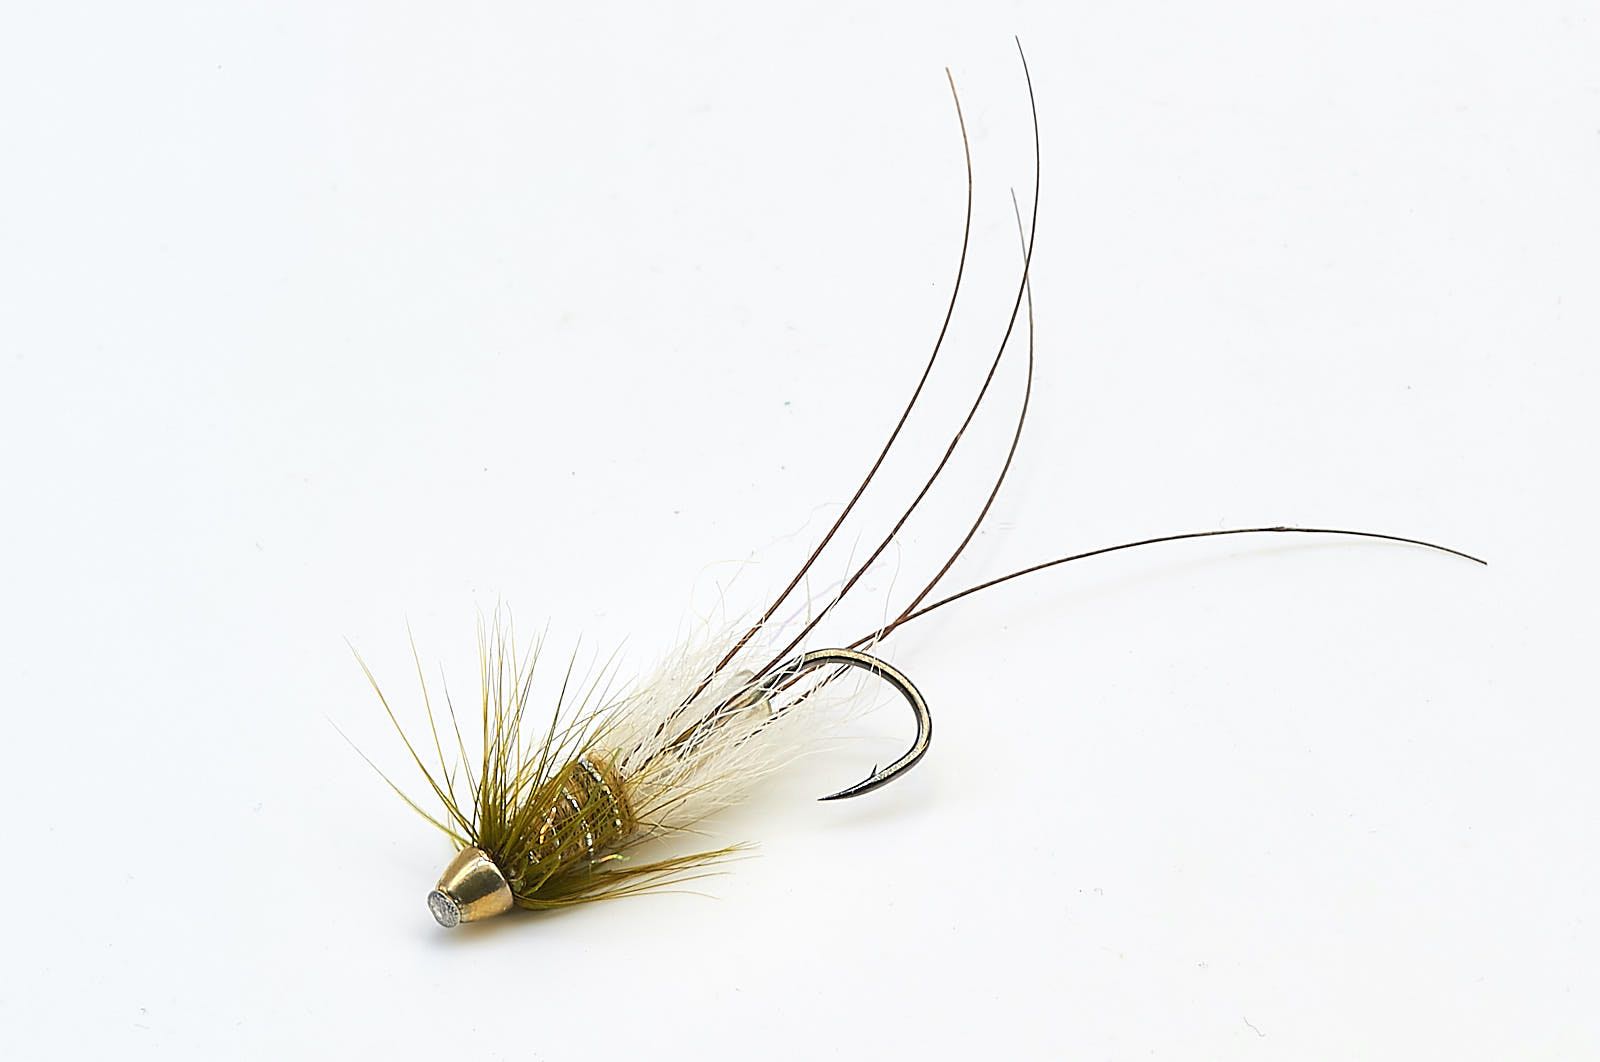 Bomber Olive /& Red Fly Fishing Fly